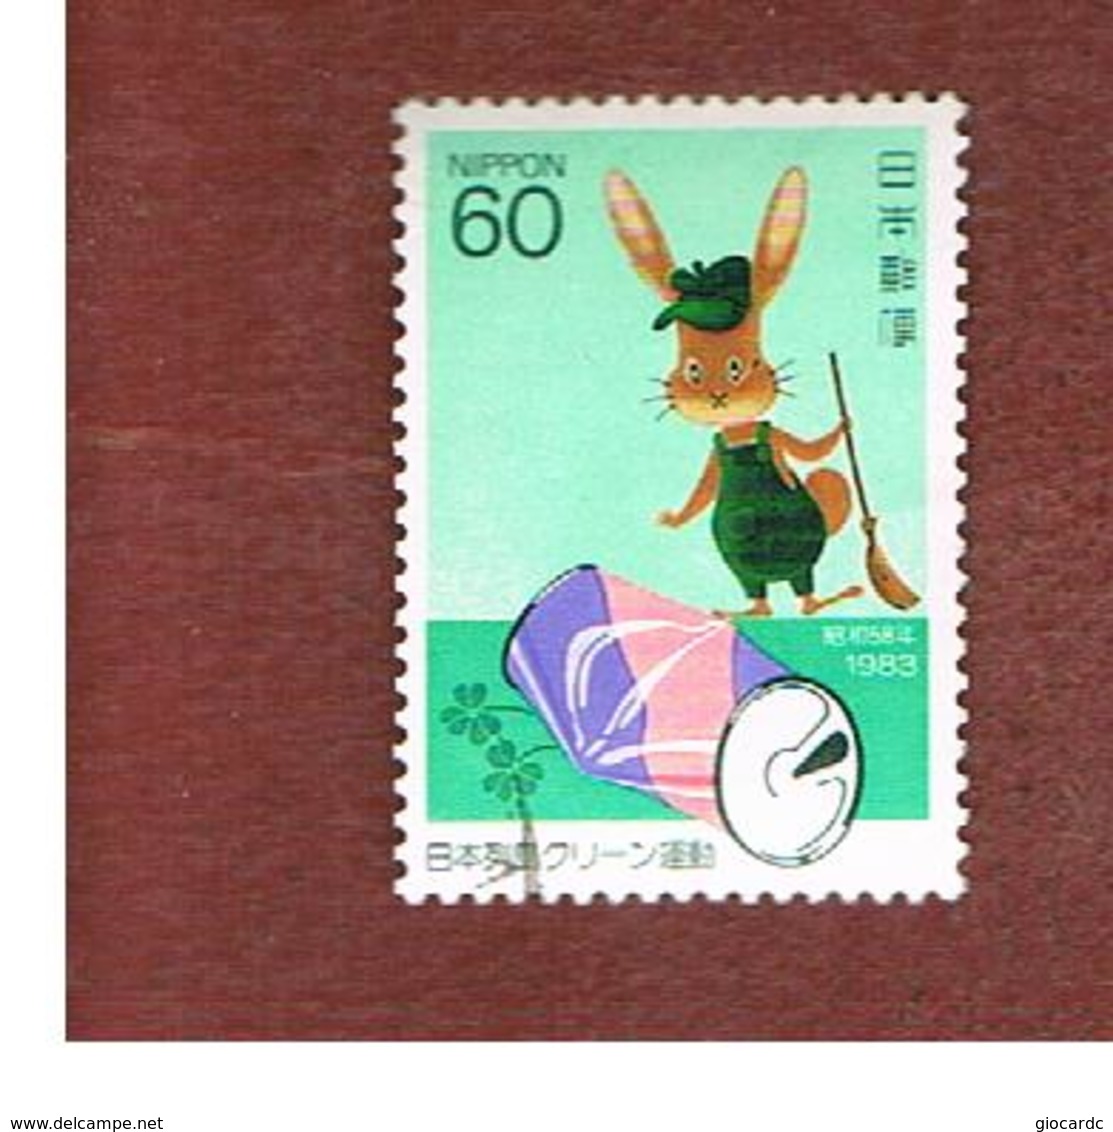 GIAPPONE  (JAPAN) - SG 1704 -   1983 ISLAND CLEAN-UP CAMPAIGN         - USED° - Used Stamps